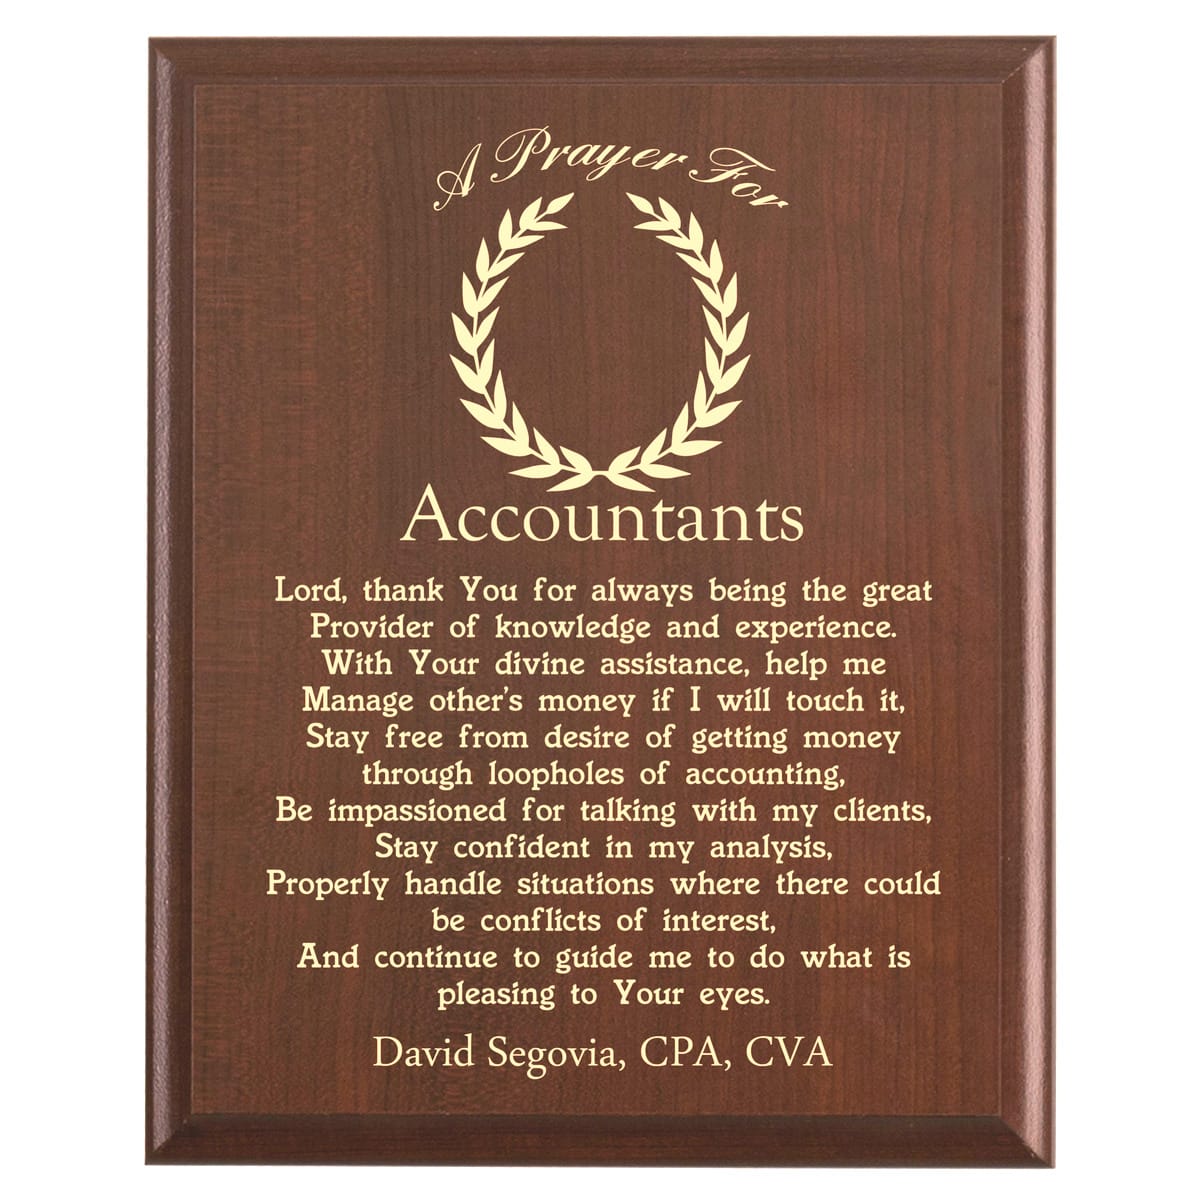 Plaque photo: Accountants Prayer Plaque design with free personalization. Wood style finish with customized text.